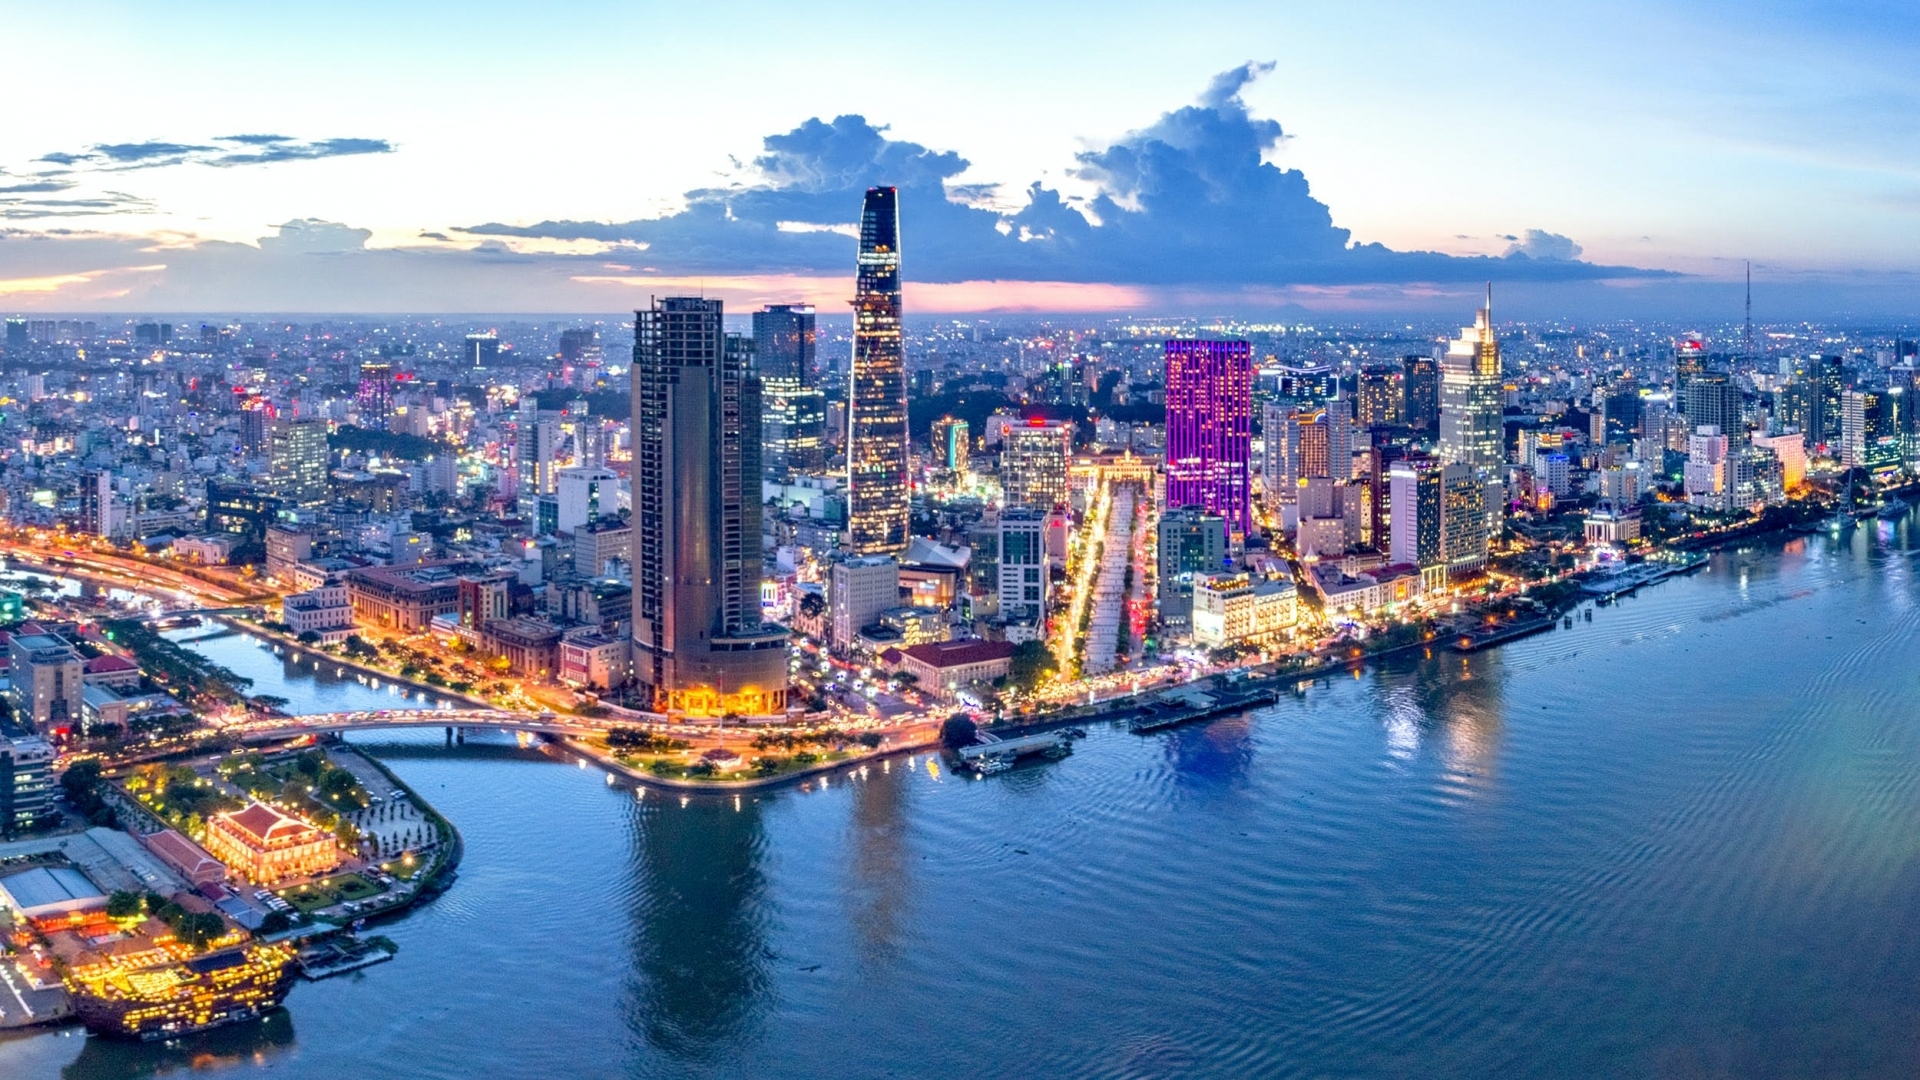 Vietnam Needs to Make Business Simpler to Increase Investment